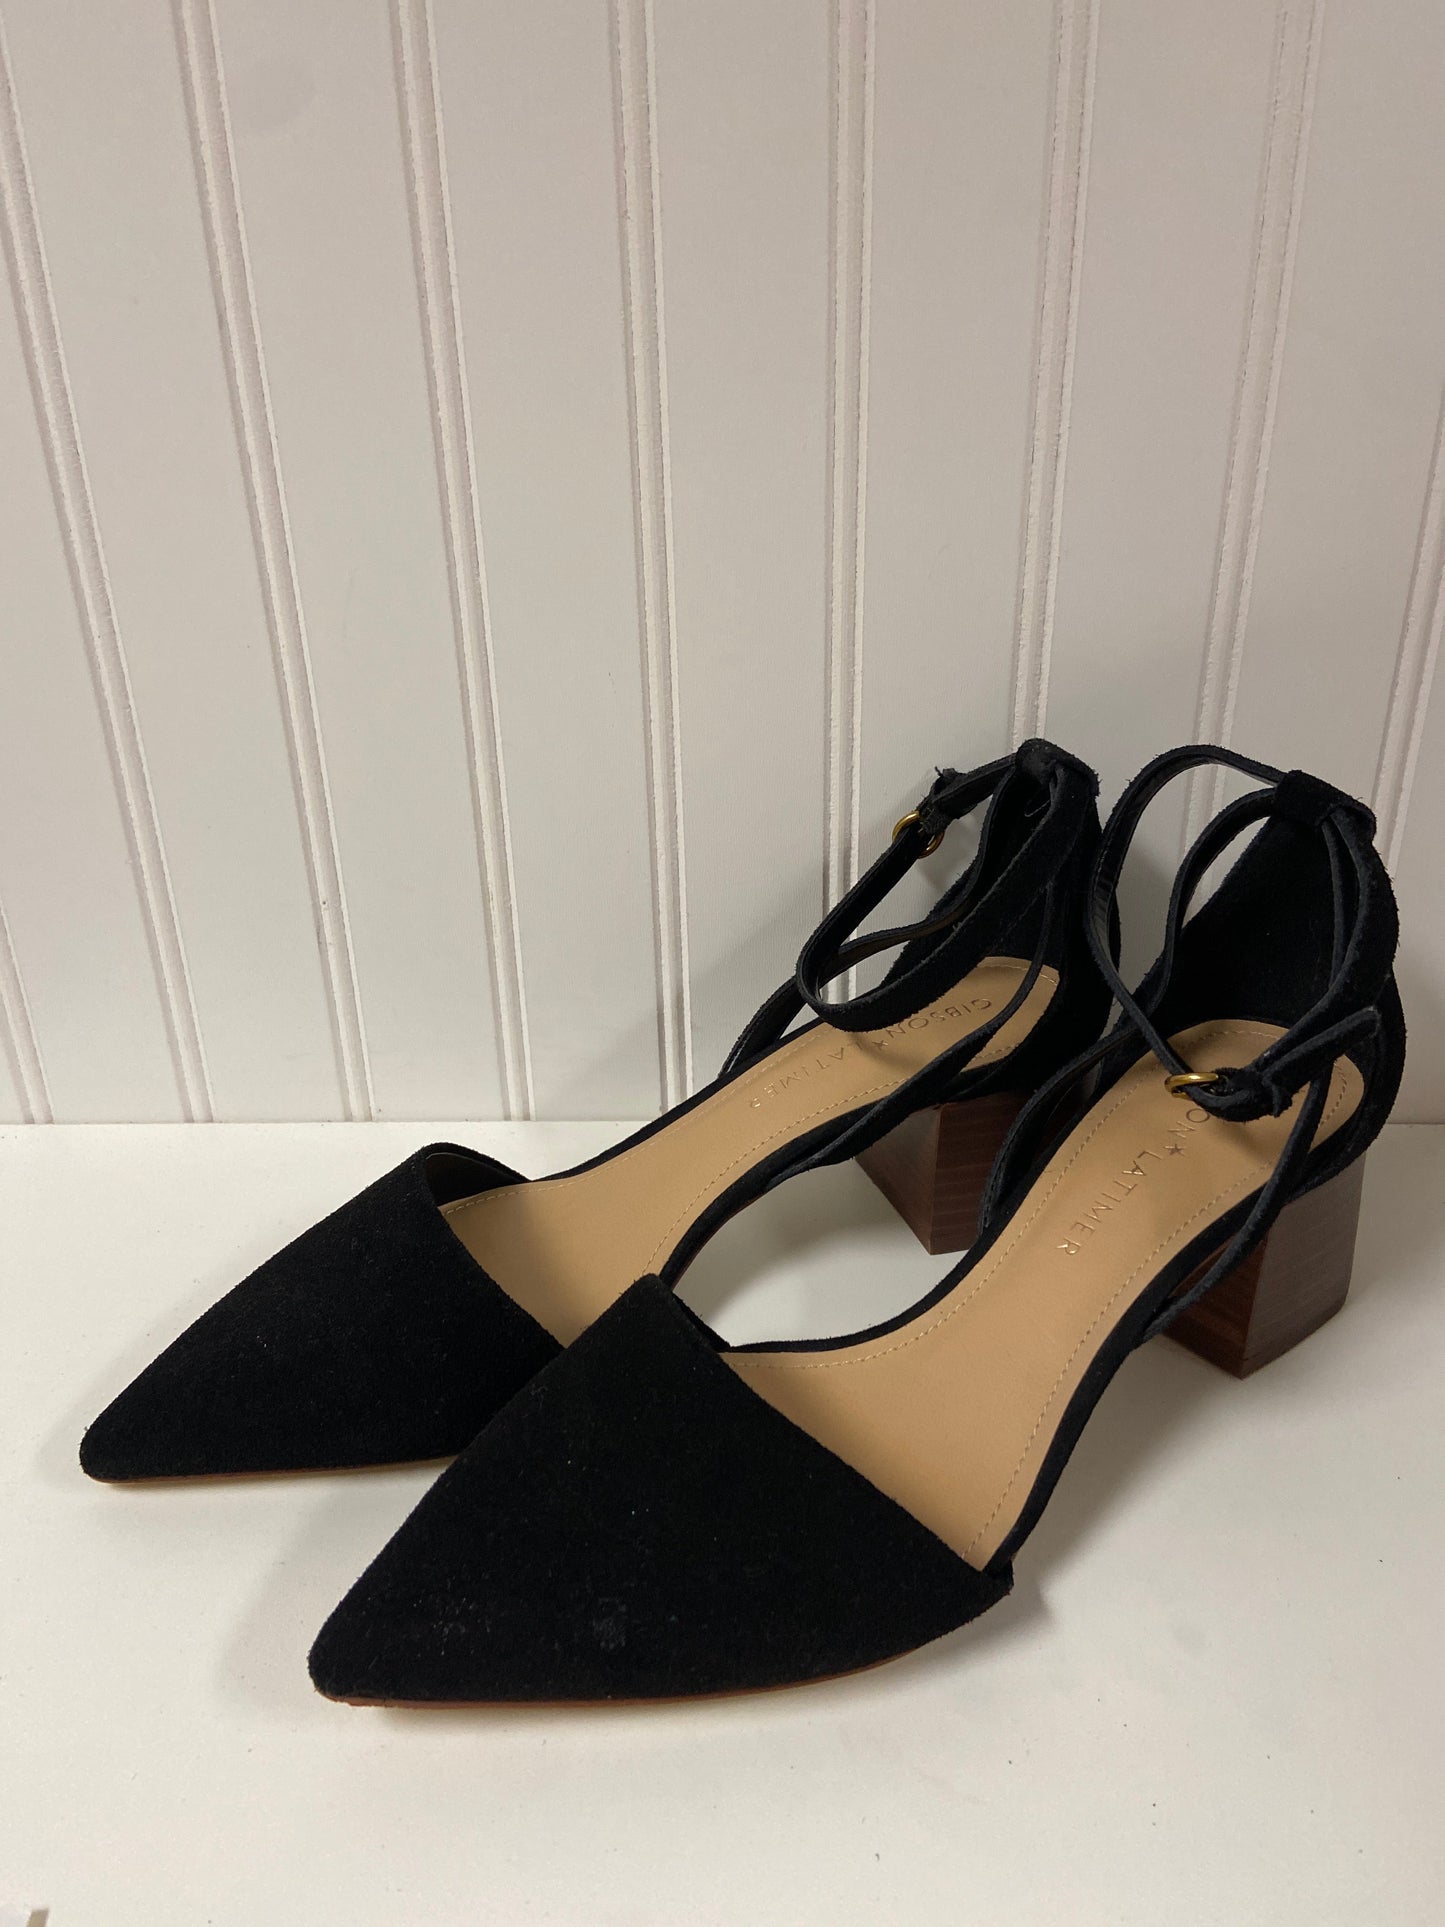 Black Shoes Heels Block Gibson And Latimer, Size 9